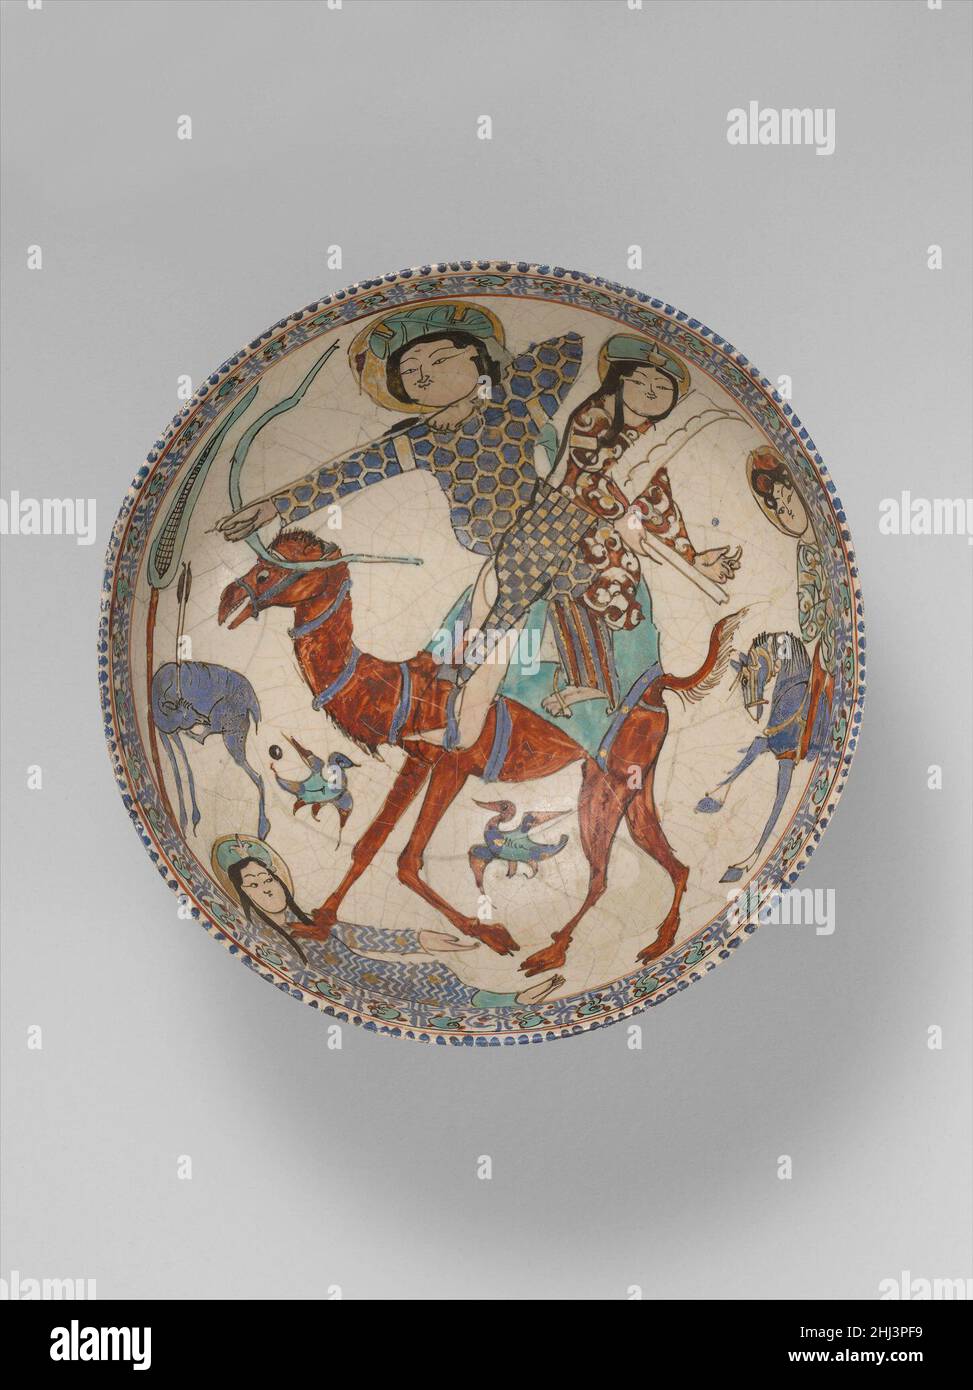 Bowl with Bahram Gur and Azada late 12th–early 13th century Bahram Gur, challenged by his concubine Azada in a series of dares to show his mastery in archery, here pins together with a single arrow the ear and hoof of a gazelle, while Azada plays the harp. The tragic epilogue of this story from the Persian epic Shahnama, in which a camel tramples Azada after she disparages the prince for his cruel feats, is portrayed at the bottom of the bowl. This popular episode was depicted on ceramics and metalware.. Bowl with Bahram Gur and Azada. late 12th–early 13th century. Stonepaste; glazed (opaque m Stock Photo